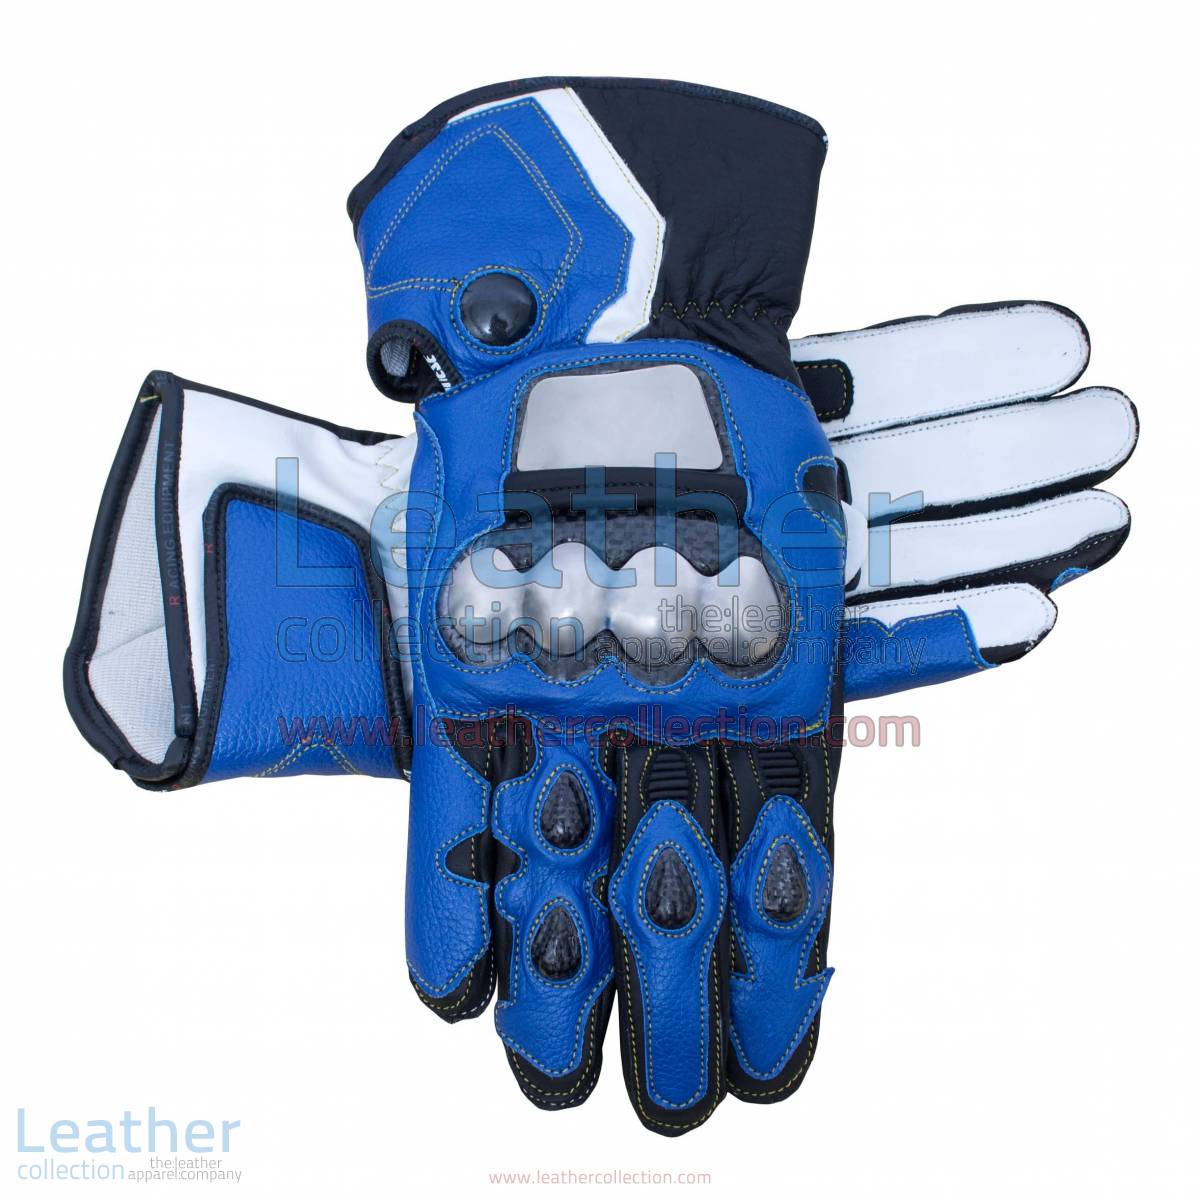 Leon Haslam Motorbike Riding Leather Gloves | motorcycle leather gloves